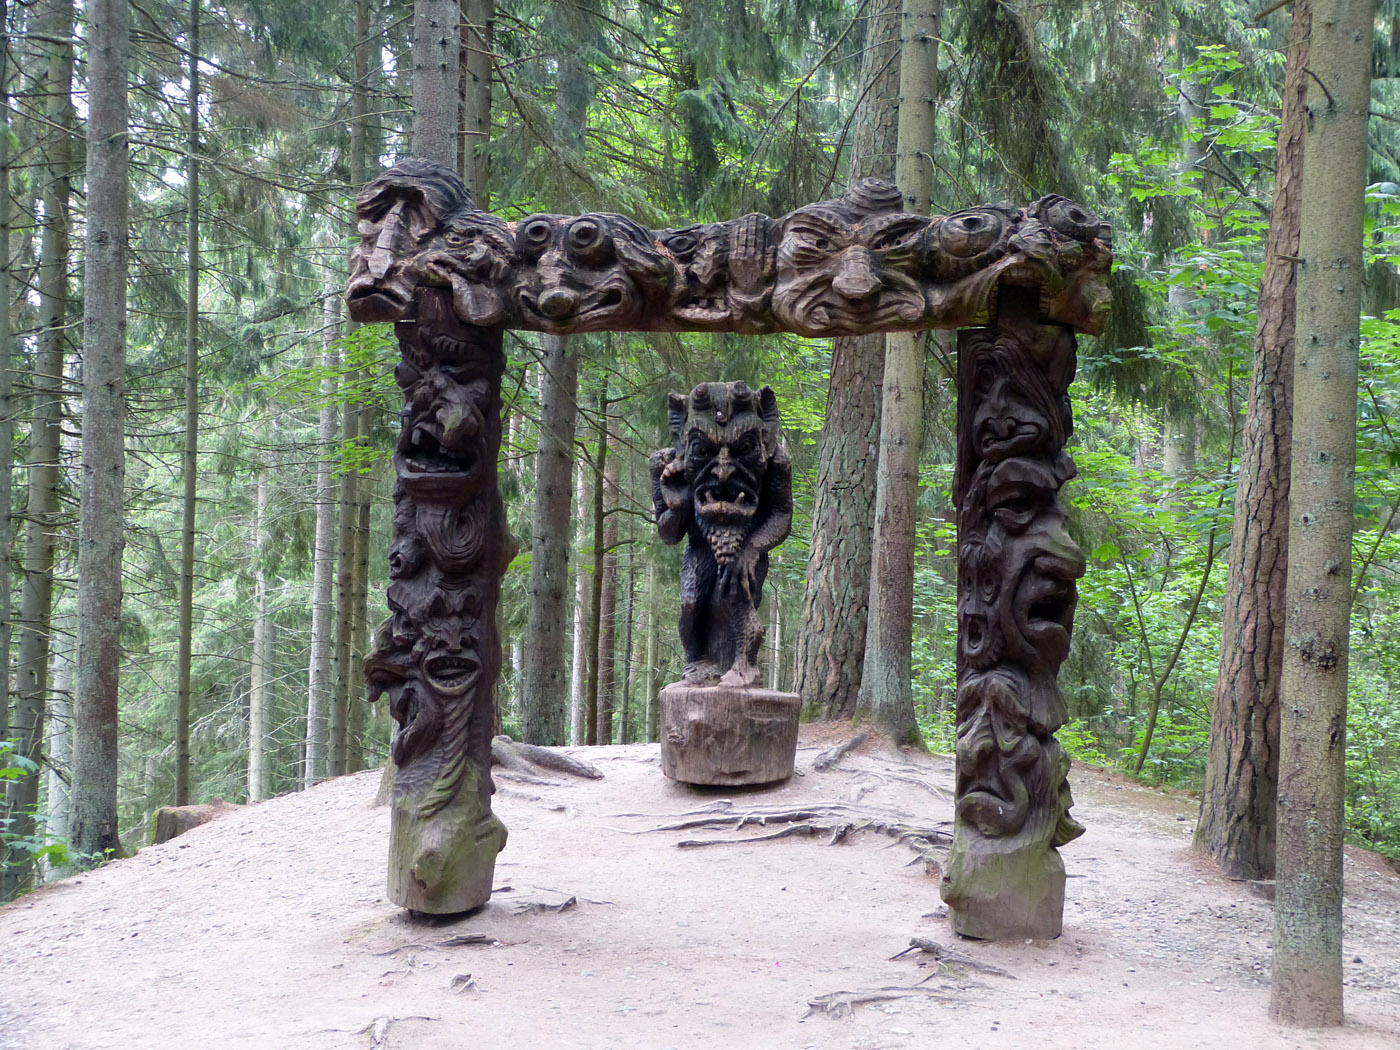 Wood Carvings, Witches Hill, Juodkrante, Lithuania